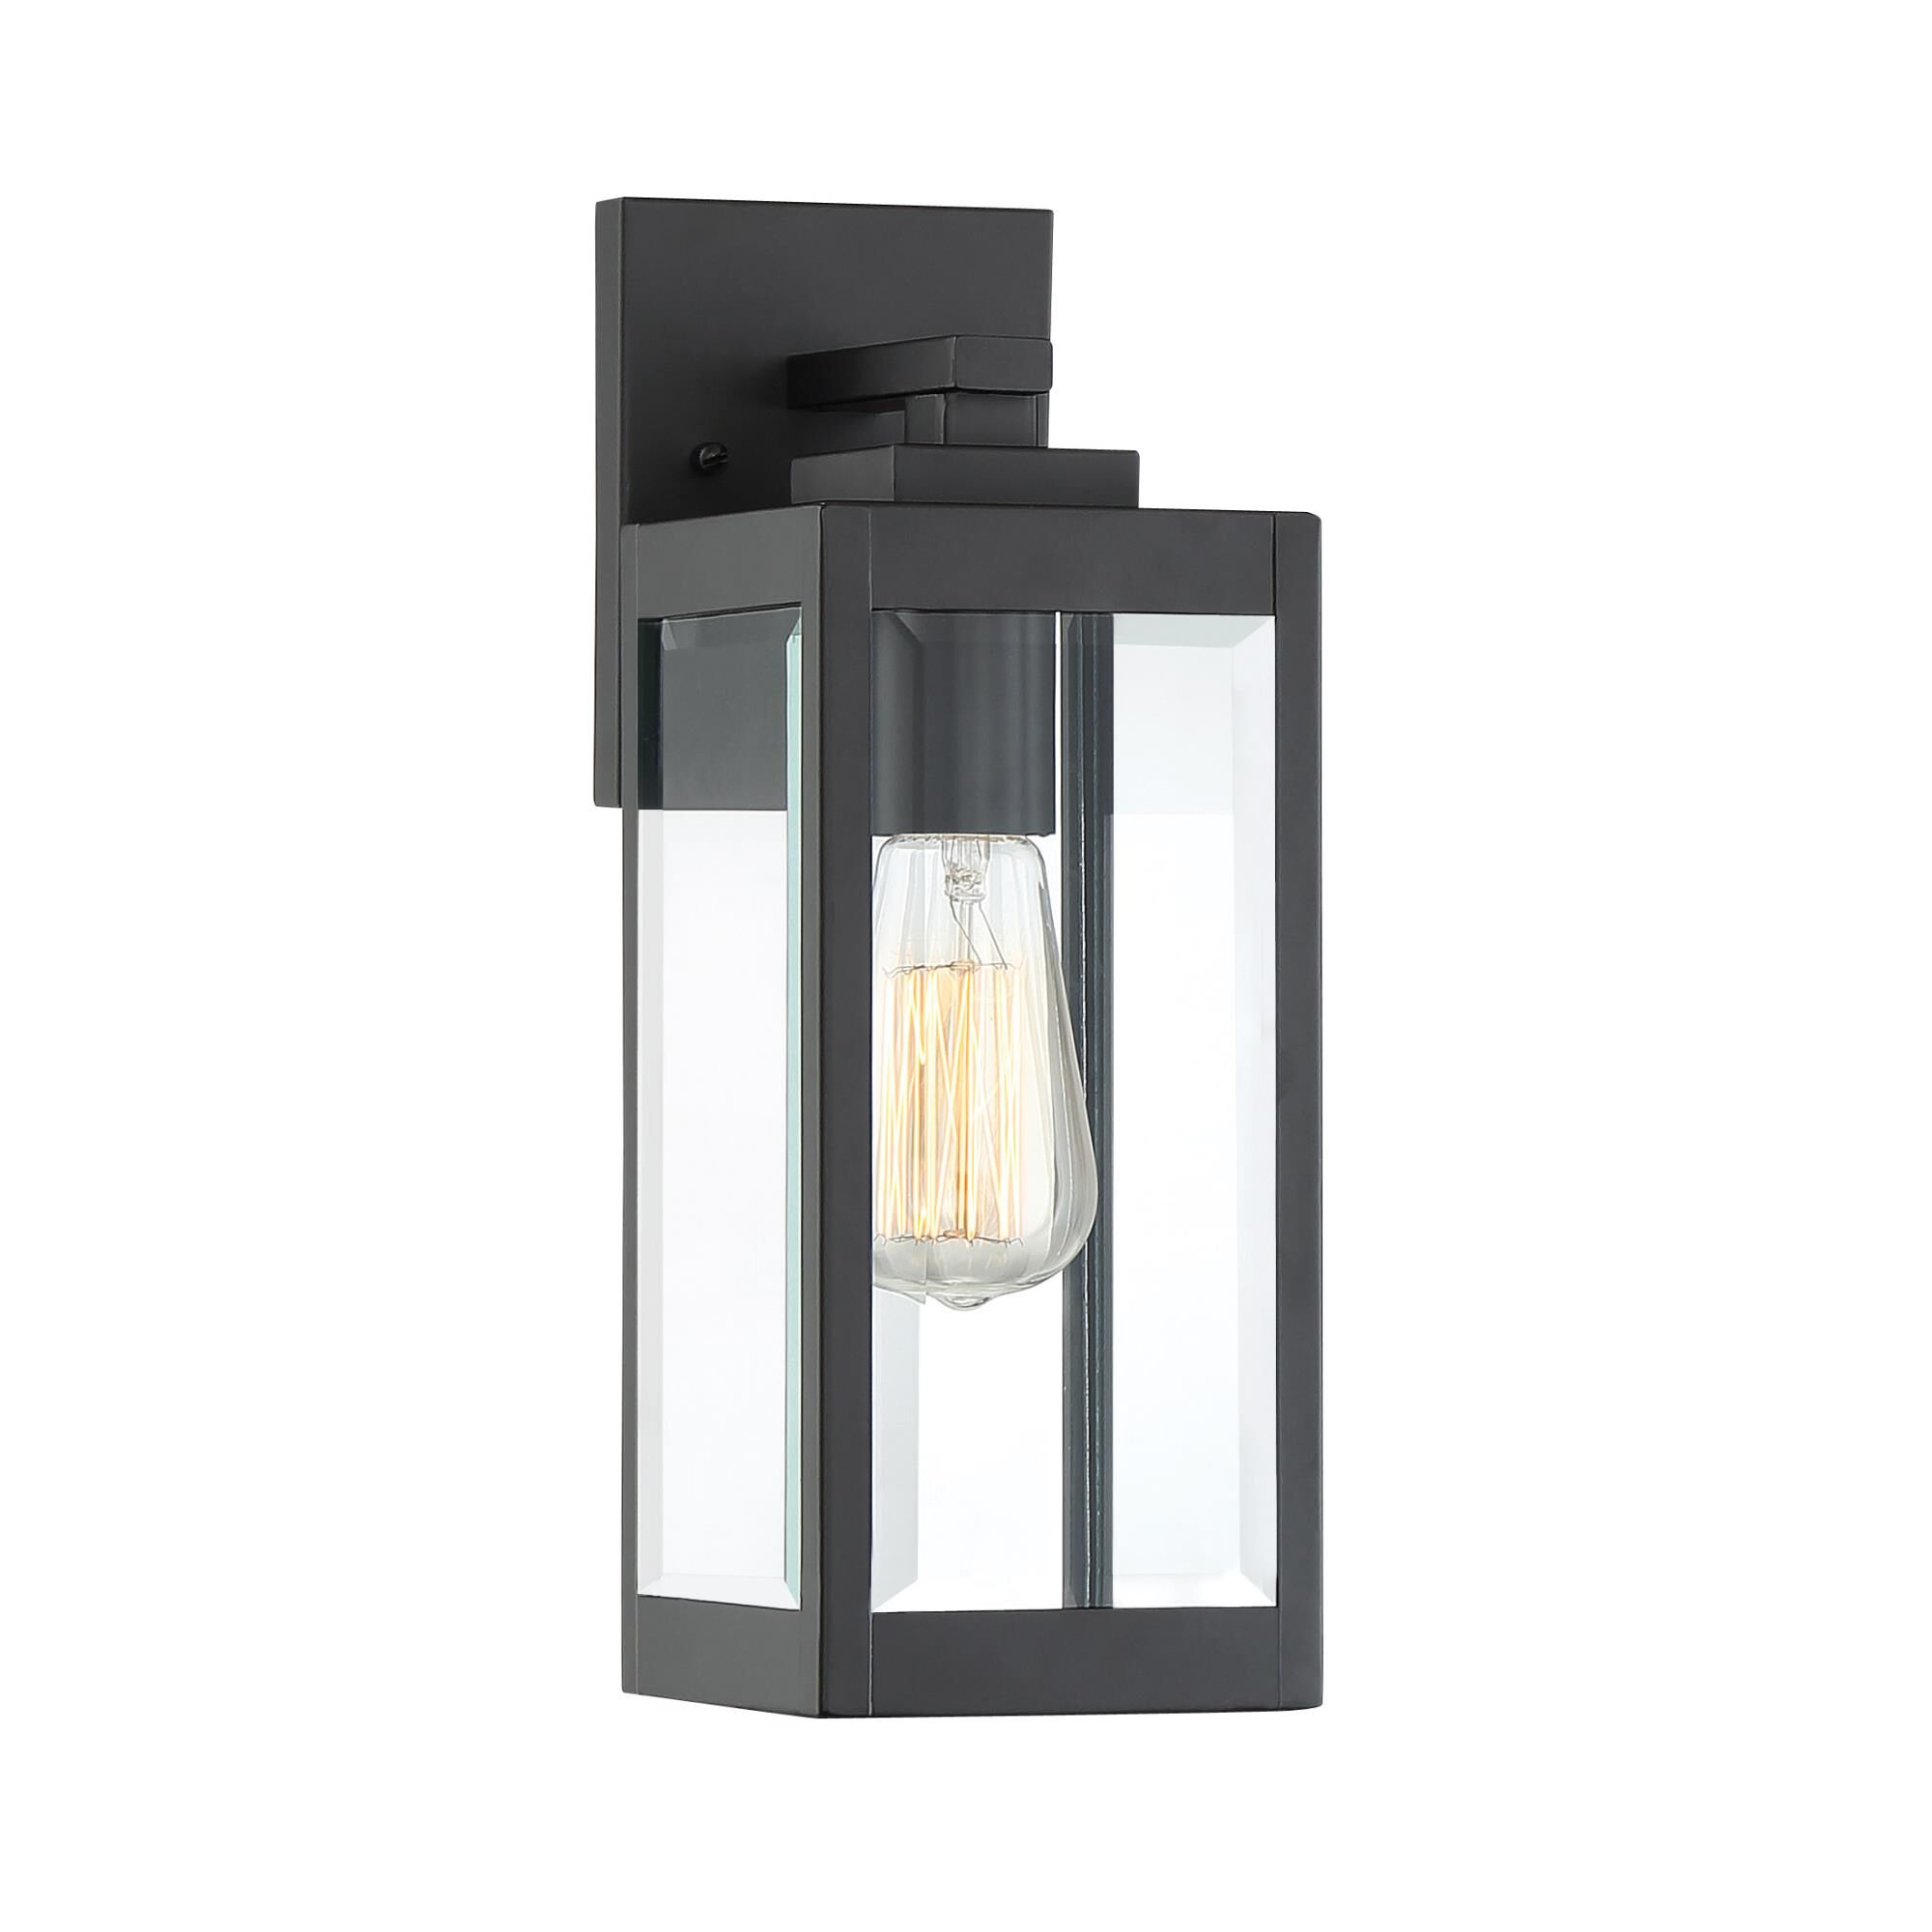 Photos - Chandelier / Lamp Quoizel Westover 14 Inch Tall Outdoor Wall Light Westover - WVR8405EK - Tr 